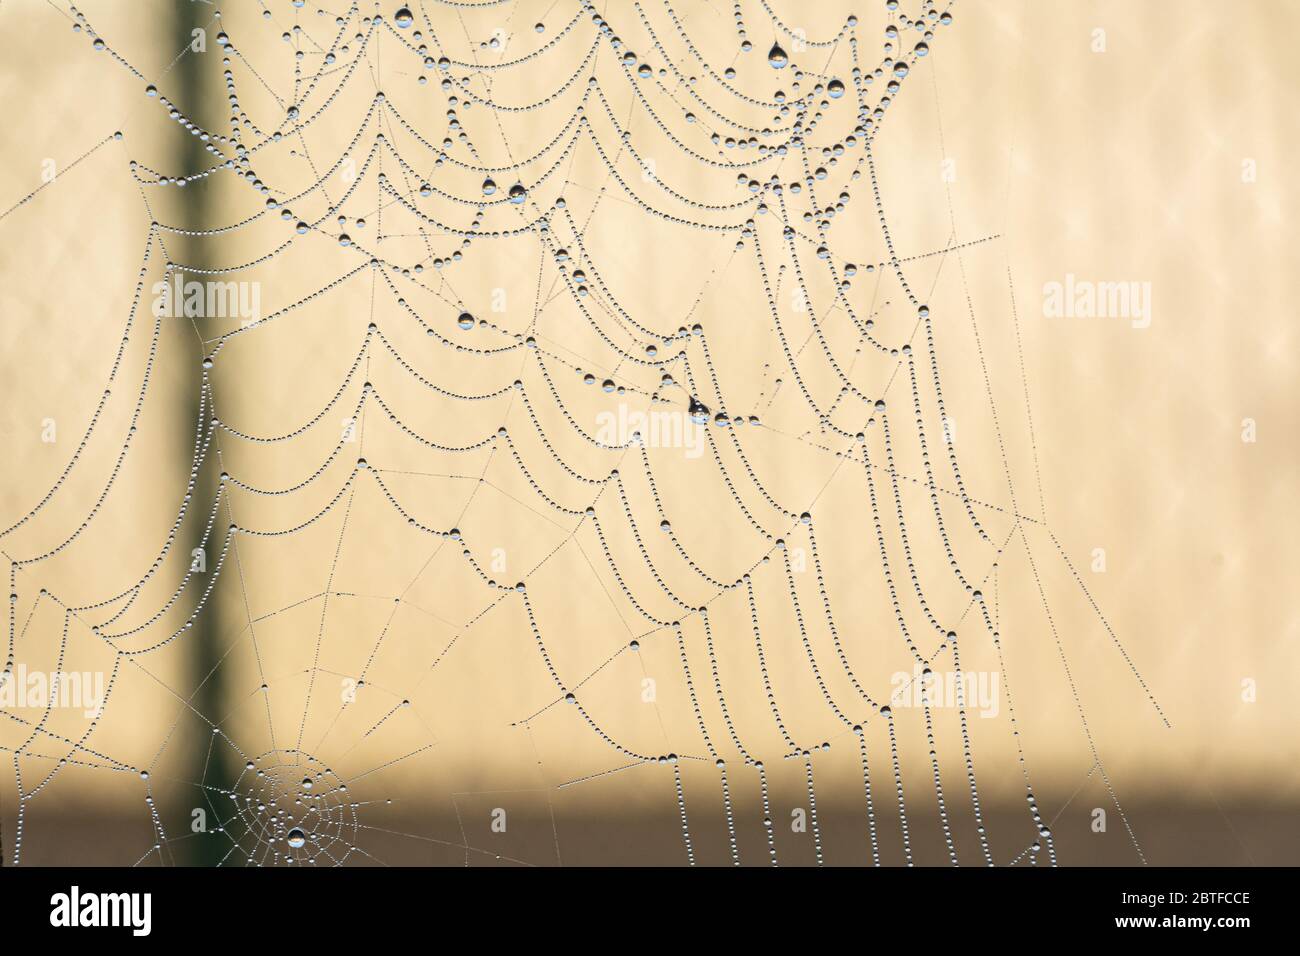 Awesome morning dew  on cobweb. Natural design at it's best Stock Photo